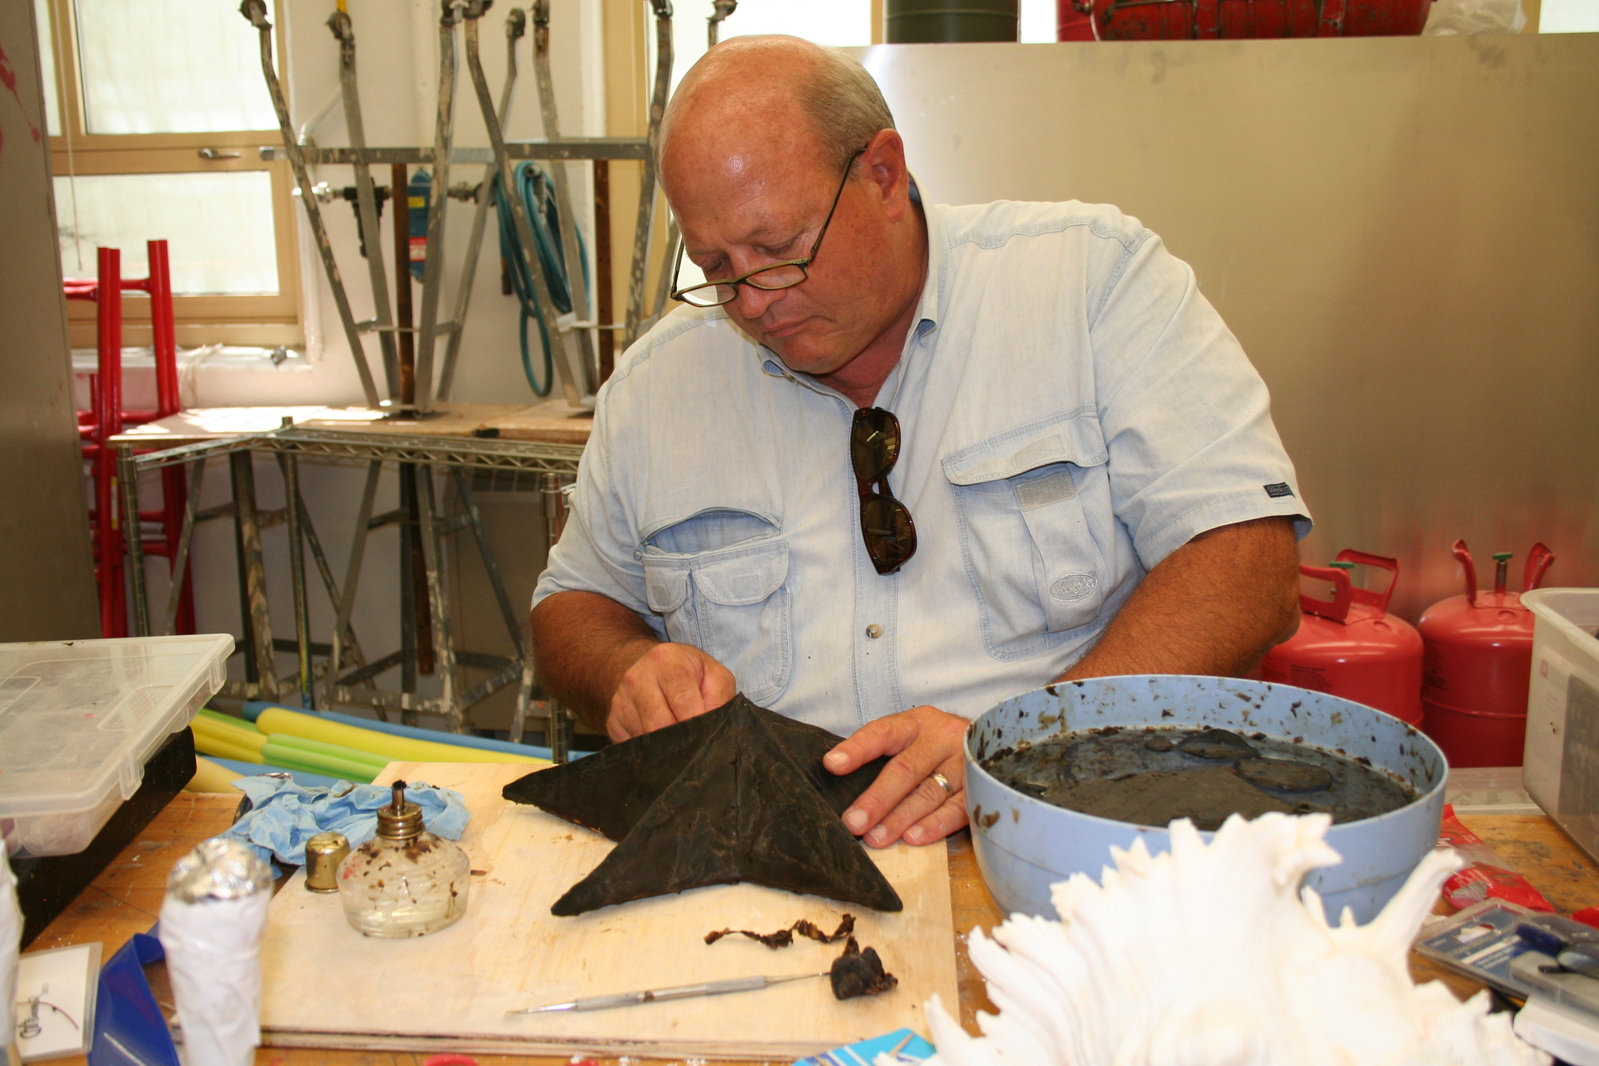 The star and comets were created by alumni in a CraftSummer workshop lead by Jim Killy, professor emeritus of art